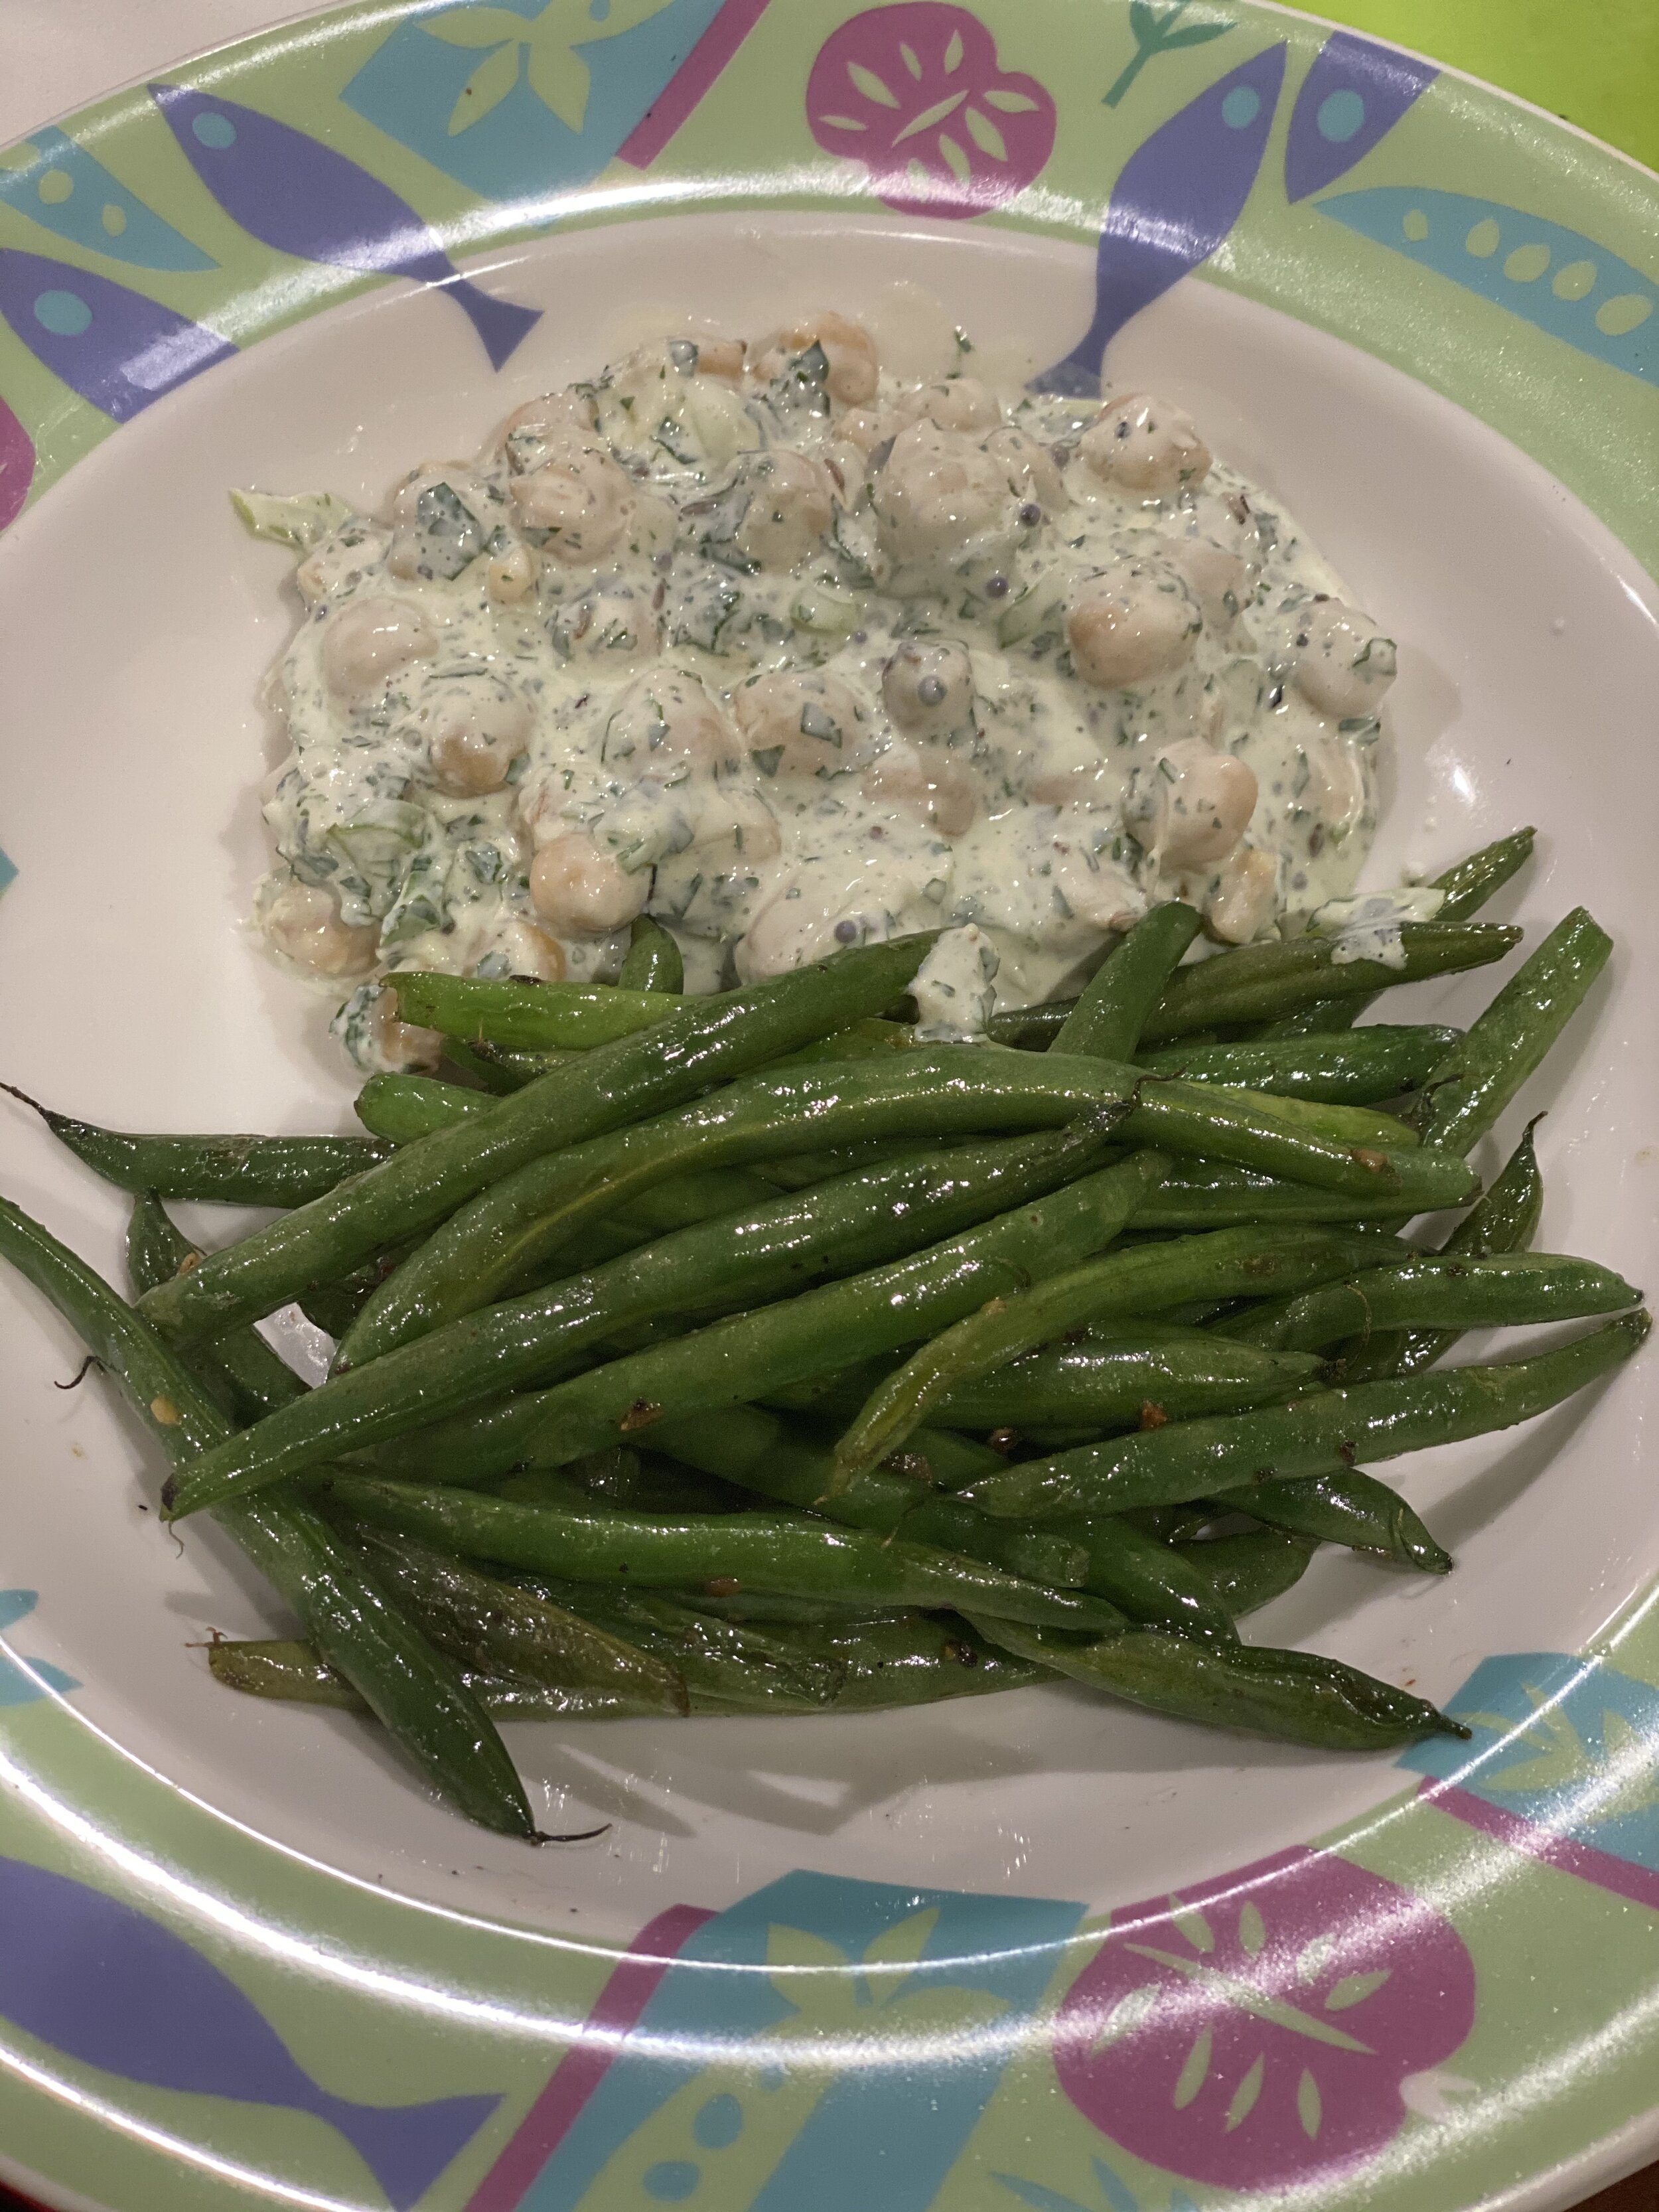 Chef Pearl's chick pea salad and garlic string beans sess. 4.jpg